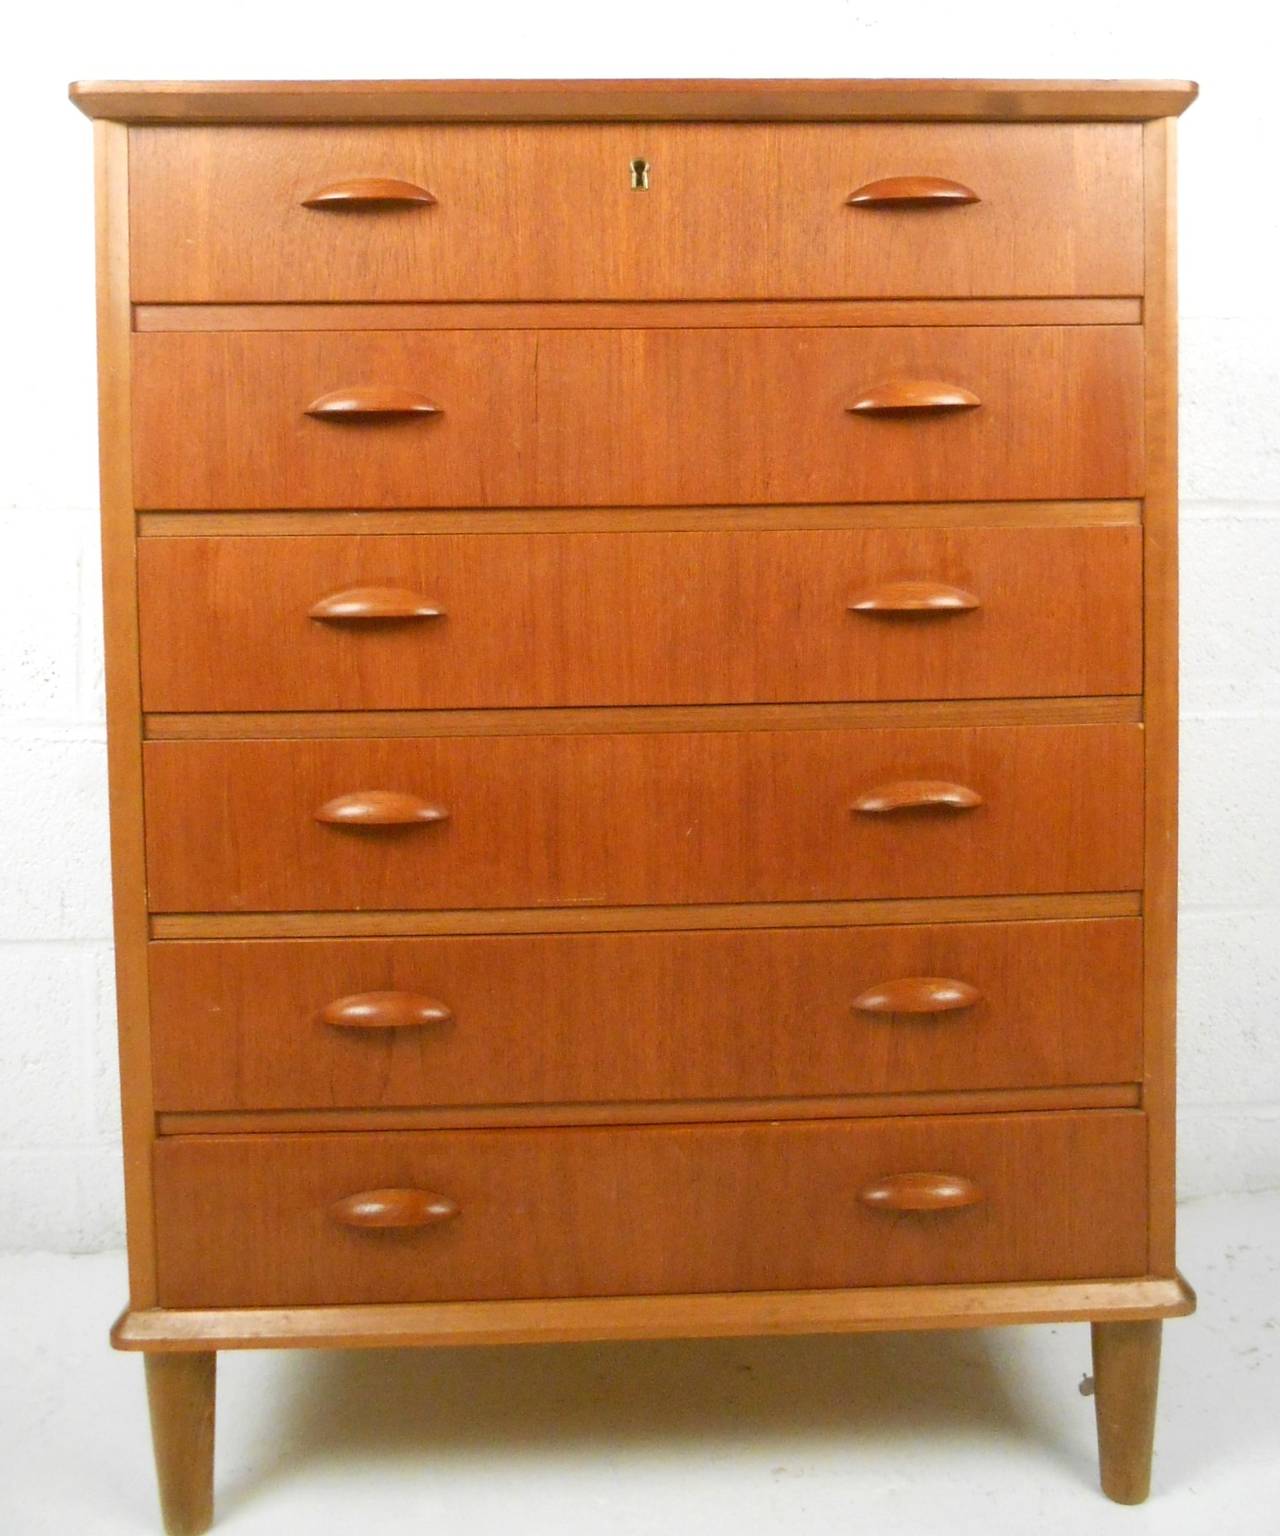 This unique mid-century dresser features a lovely teak finish, uniquely carved drawer pulls, and six spacious drawers for storage. Please confirm item location (NY or NJ).